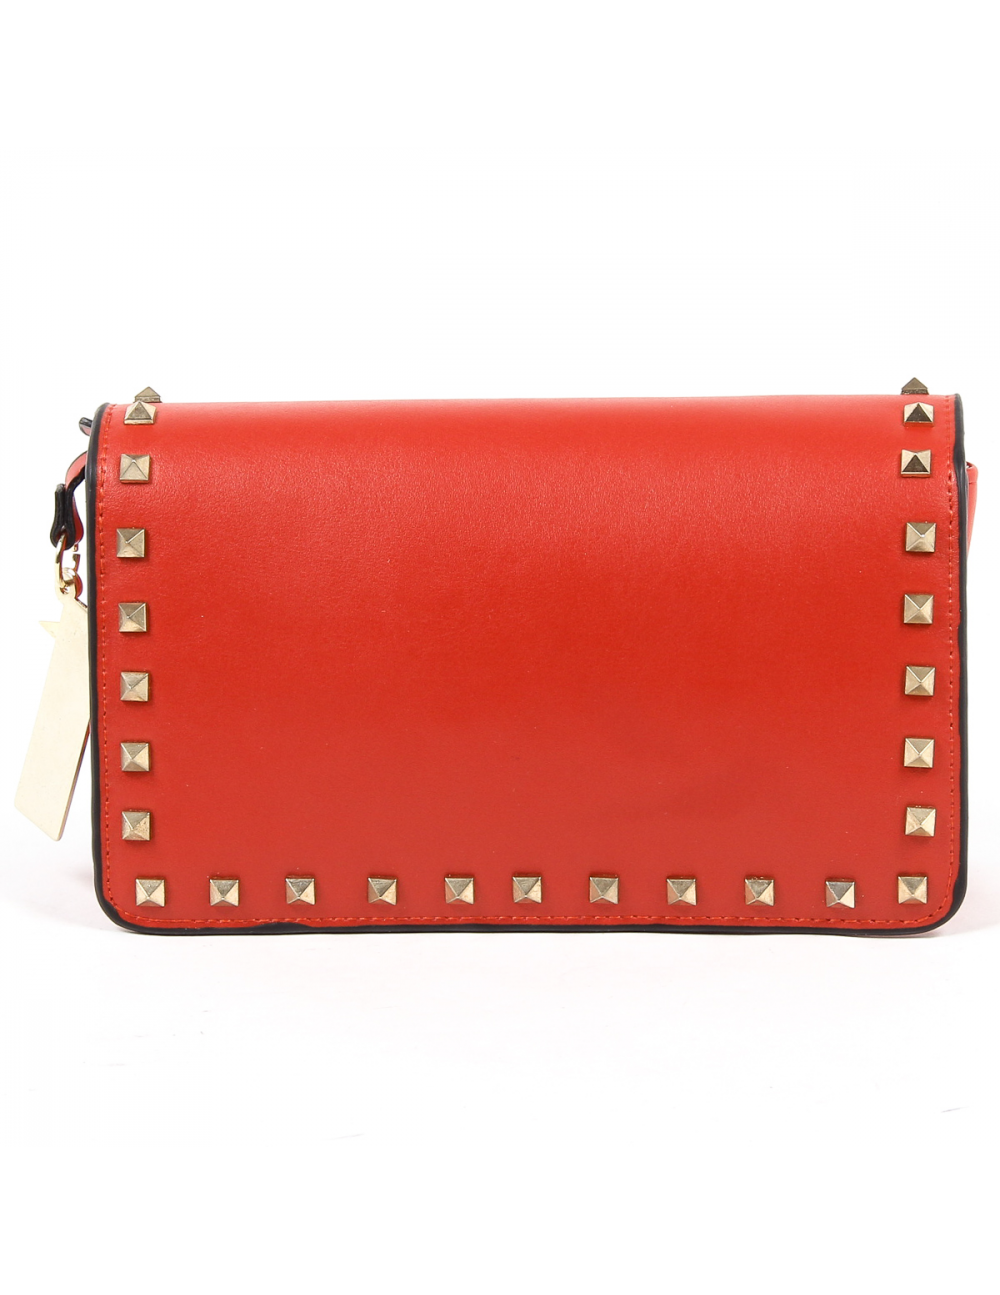 Andrew Charles Womens Handbag Red PAIGE - YuppyCollections